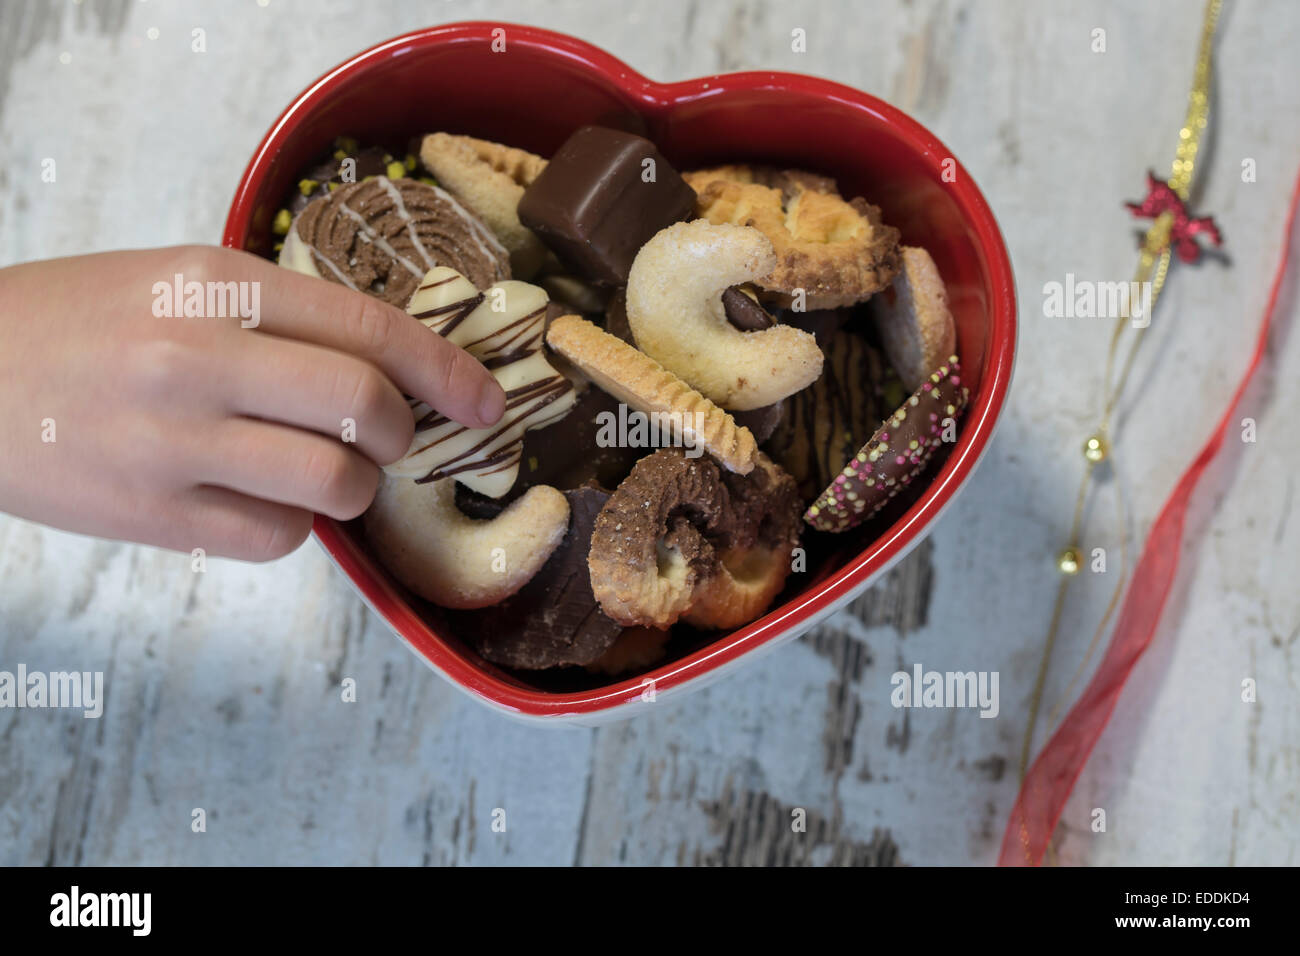 Children's hand taking Christmas cookie from a heart-shaped bowl Stock Photo